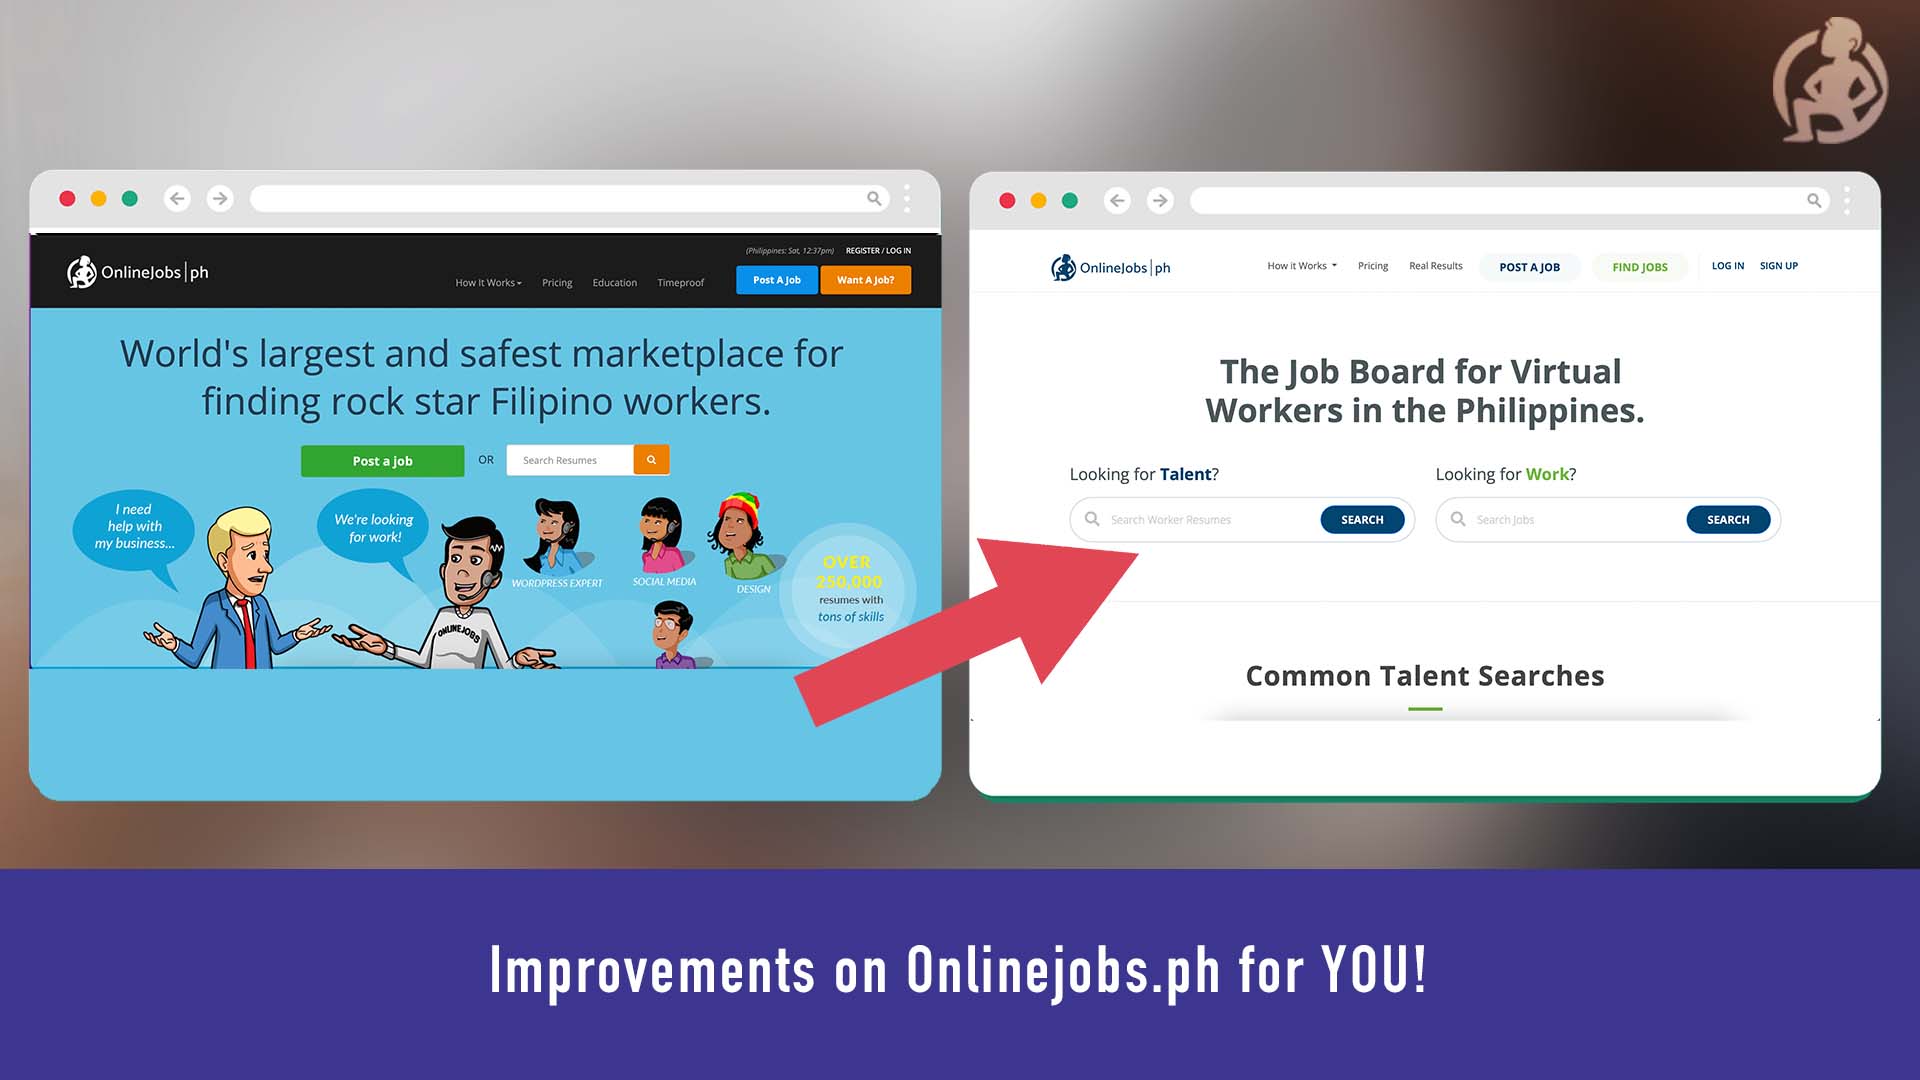 Improvements on Onlinejobs.ph for YOU! – Practical Advice